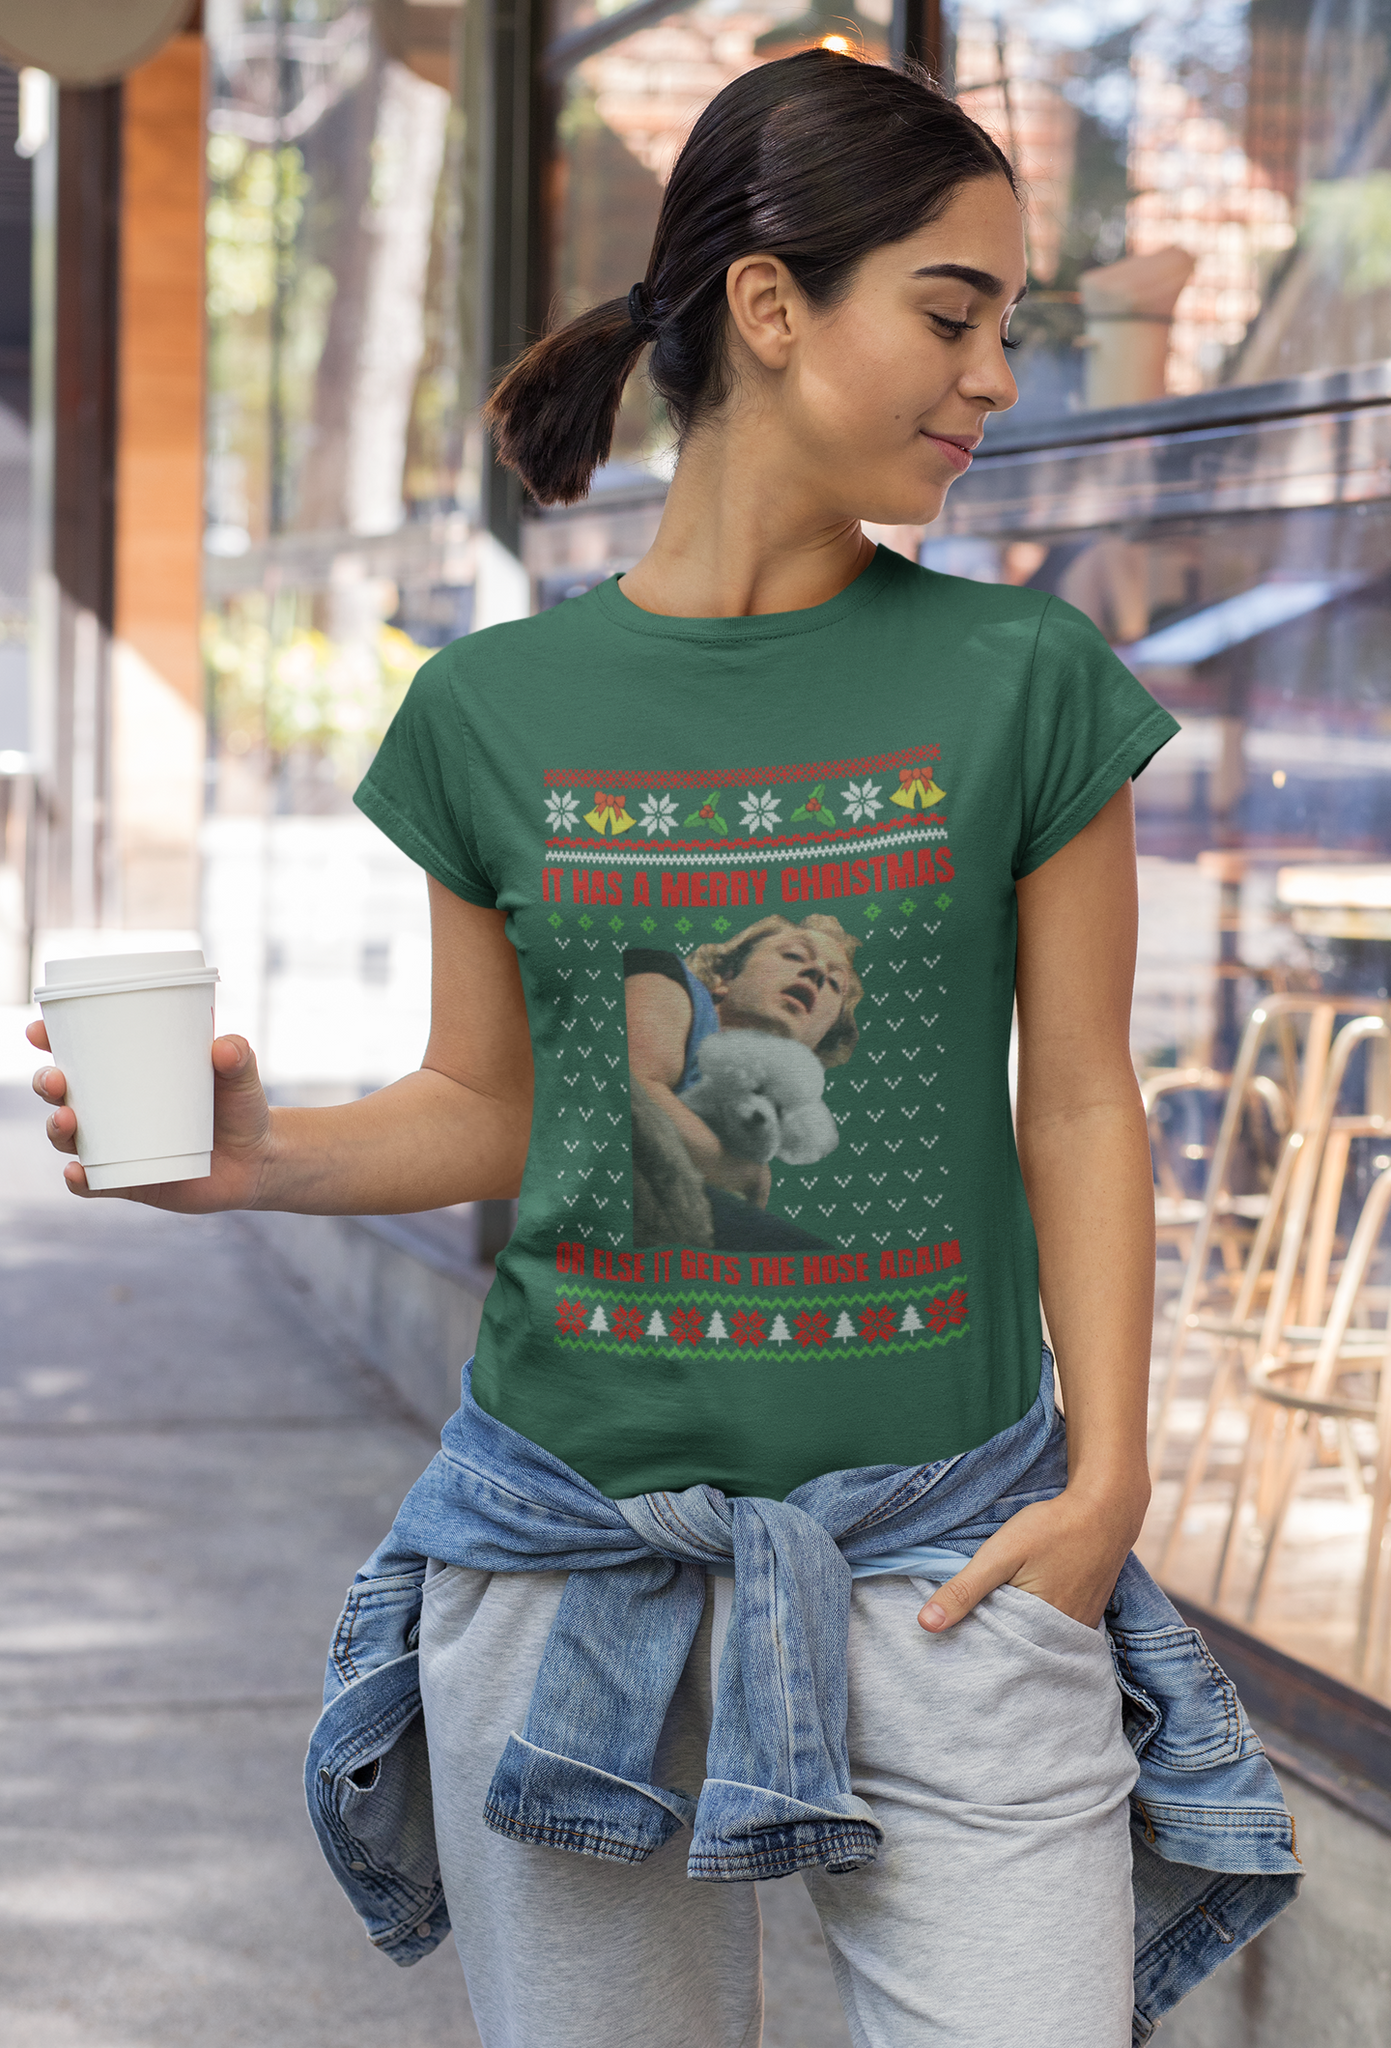 Silence Of The Lamb Ugly Sweater T Shirt, Jame Gumb Tshirt, It Has A Merry Christmas Shirt, Christmas Gifts, Halloween Gifts